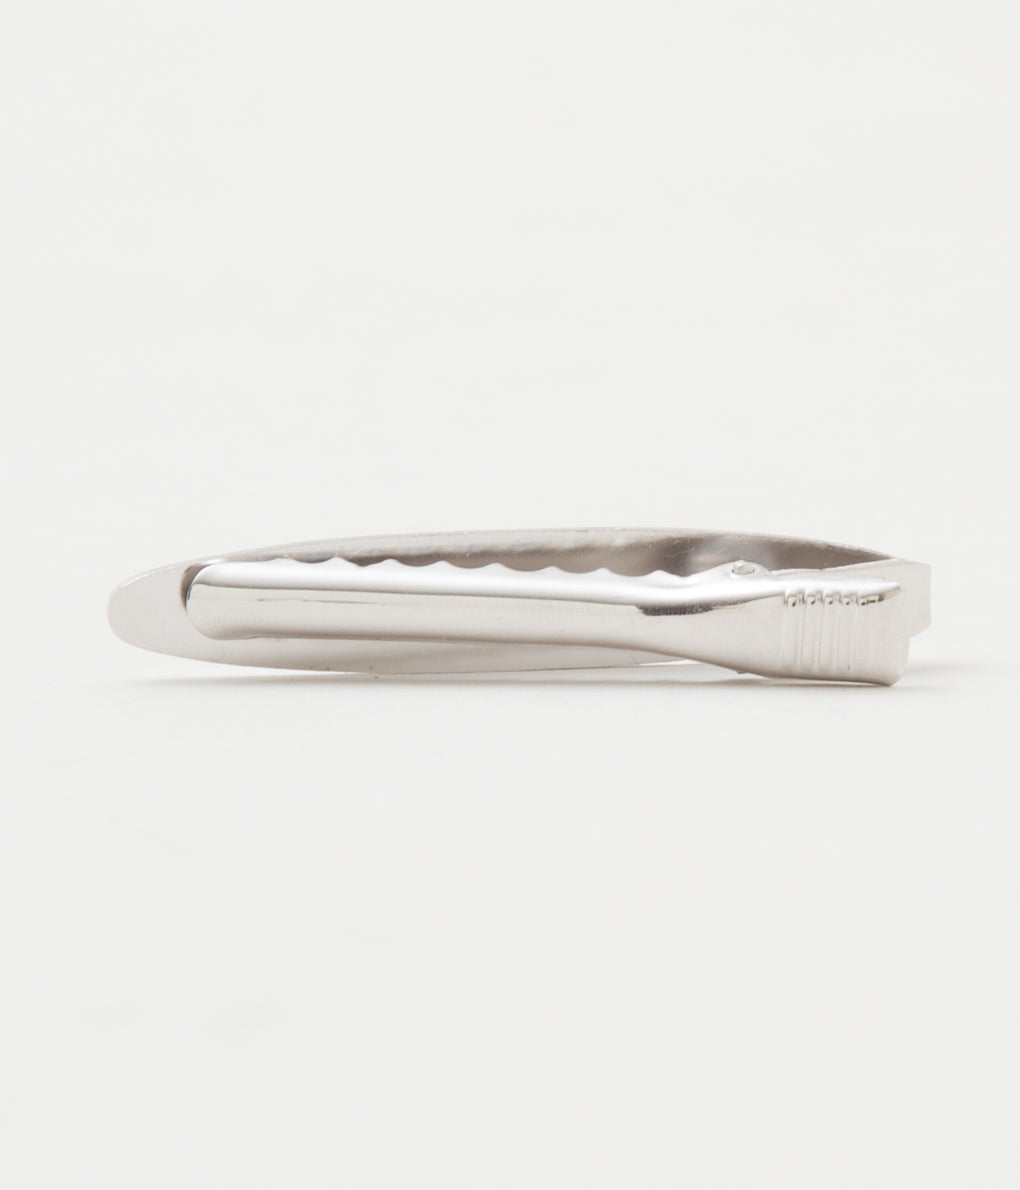 FINE AND DANDY "TIE BARS BRUSHED OVAL" (SILVER)